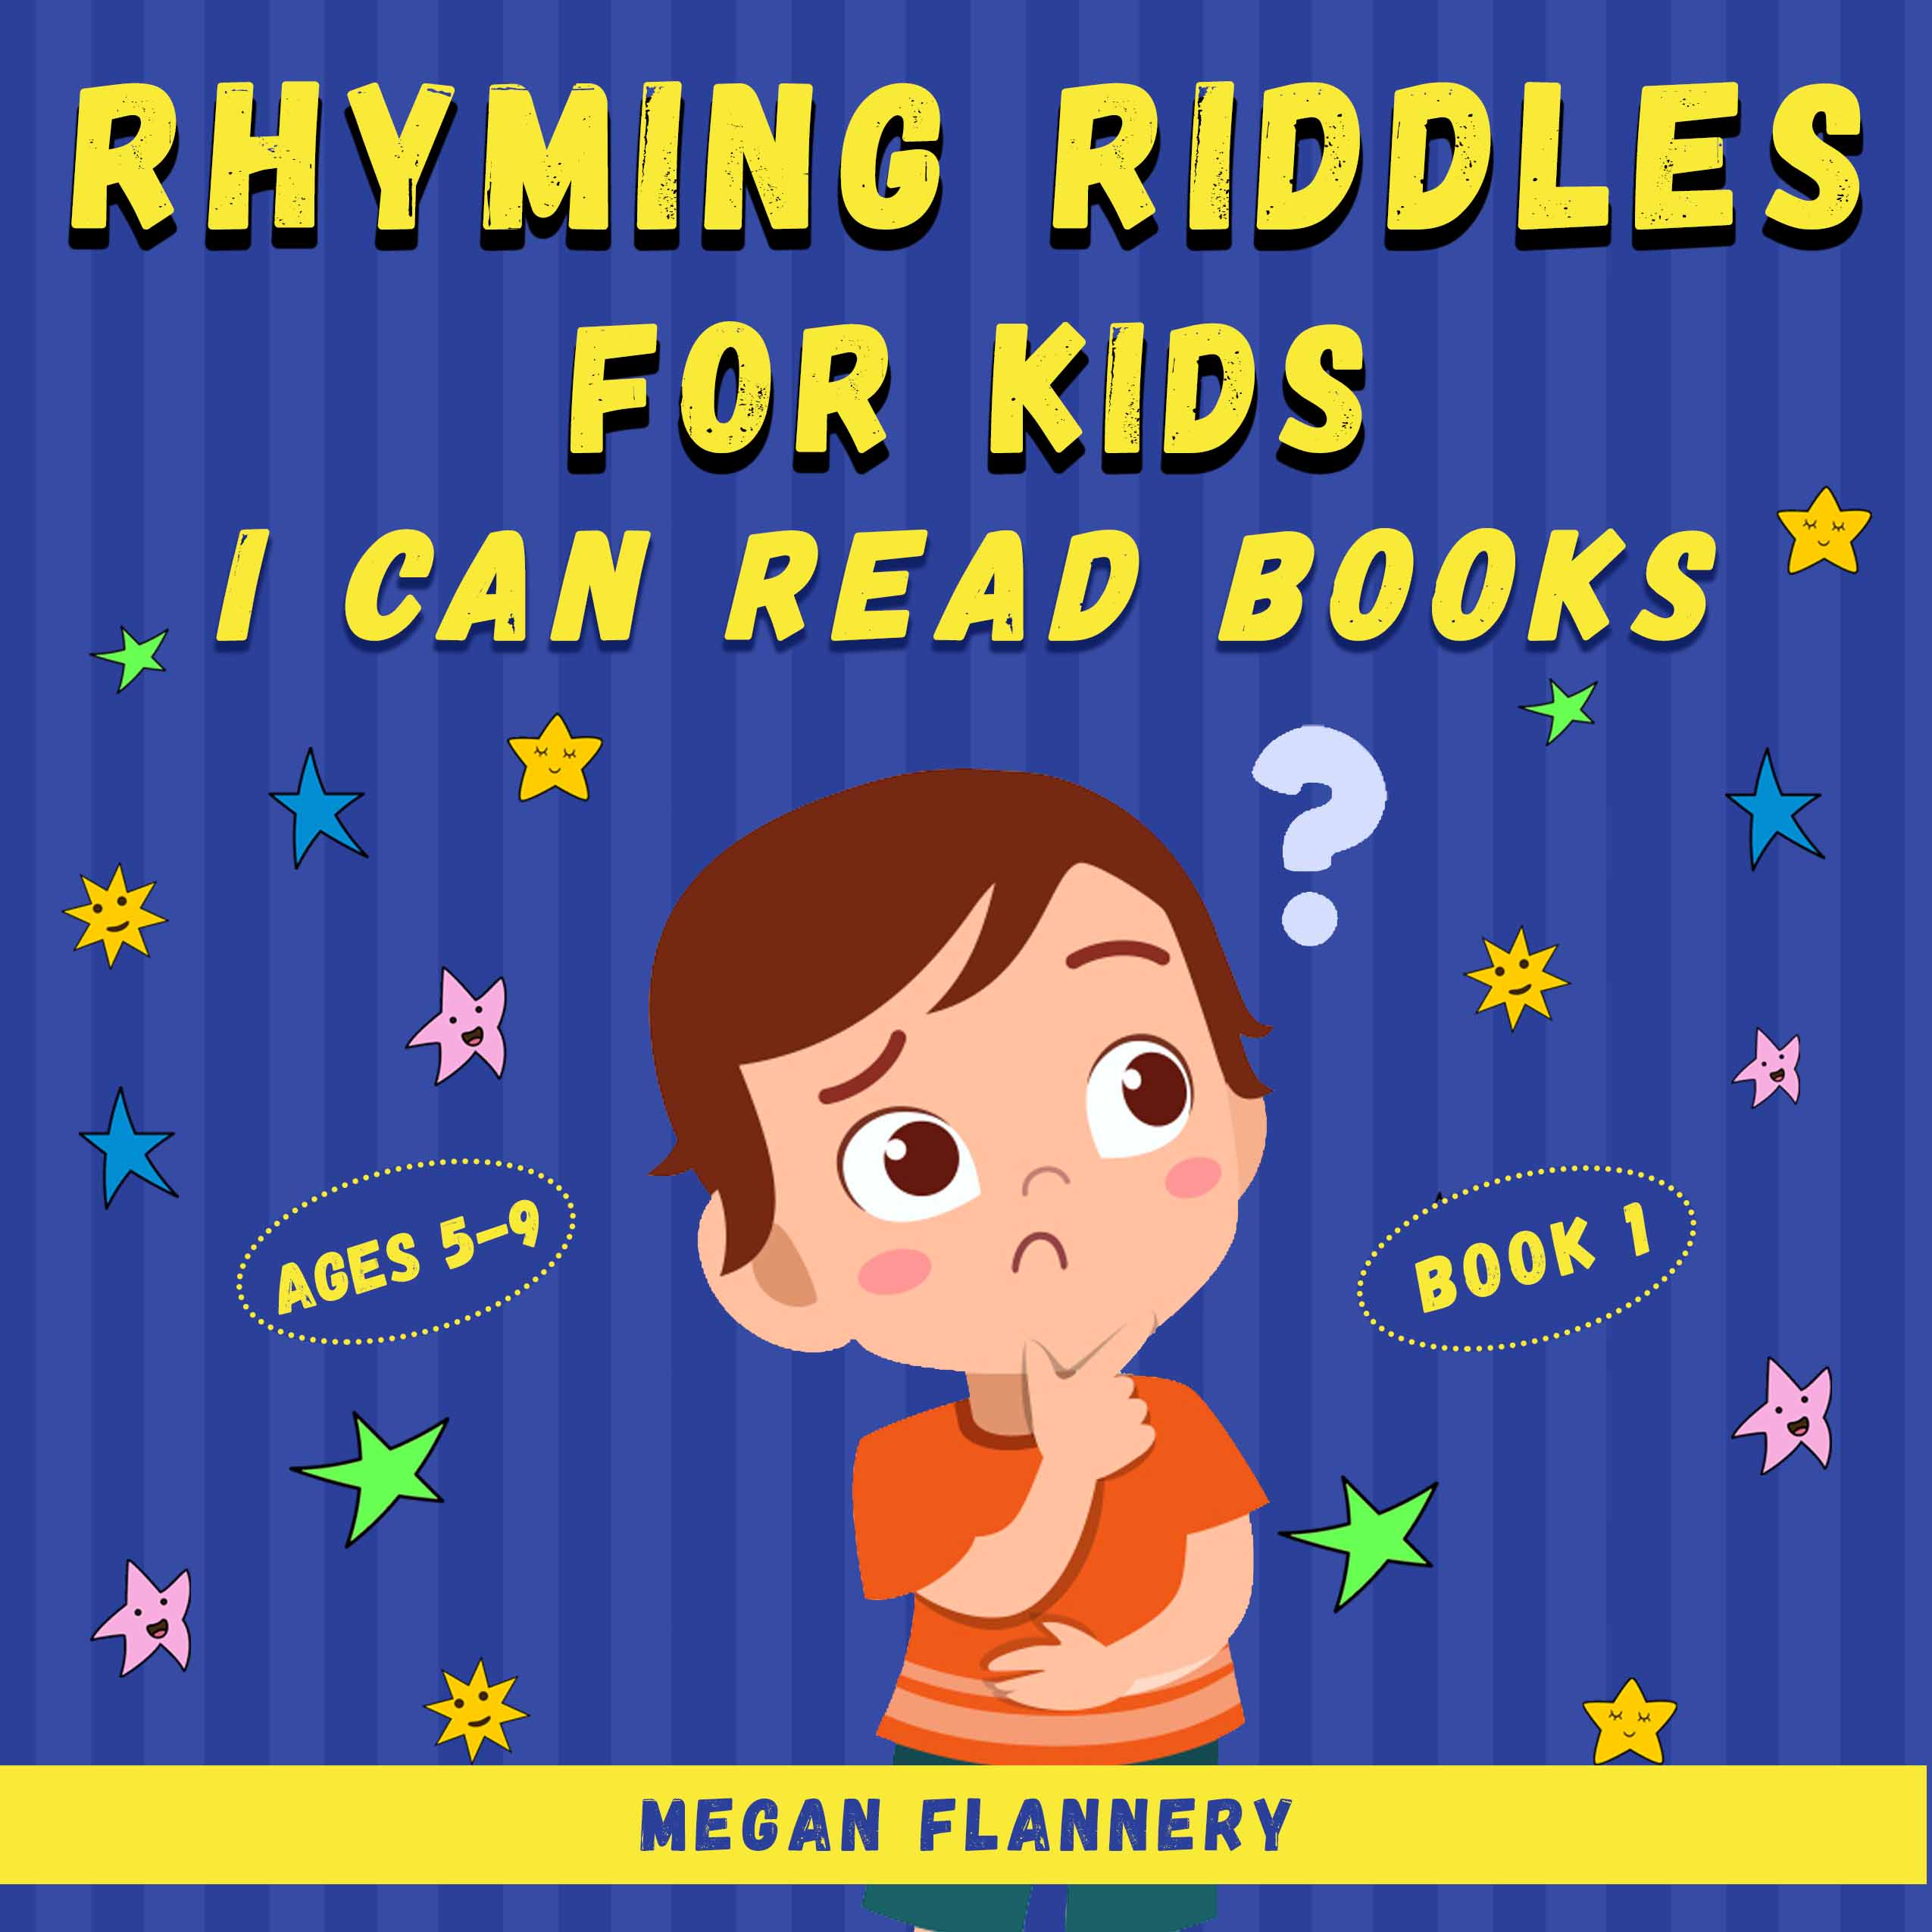 FREE: Rhyming Riddles for Kids Ages 4-9: I Can Read Books Level 1-2 by Megan Flannery